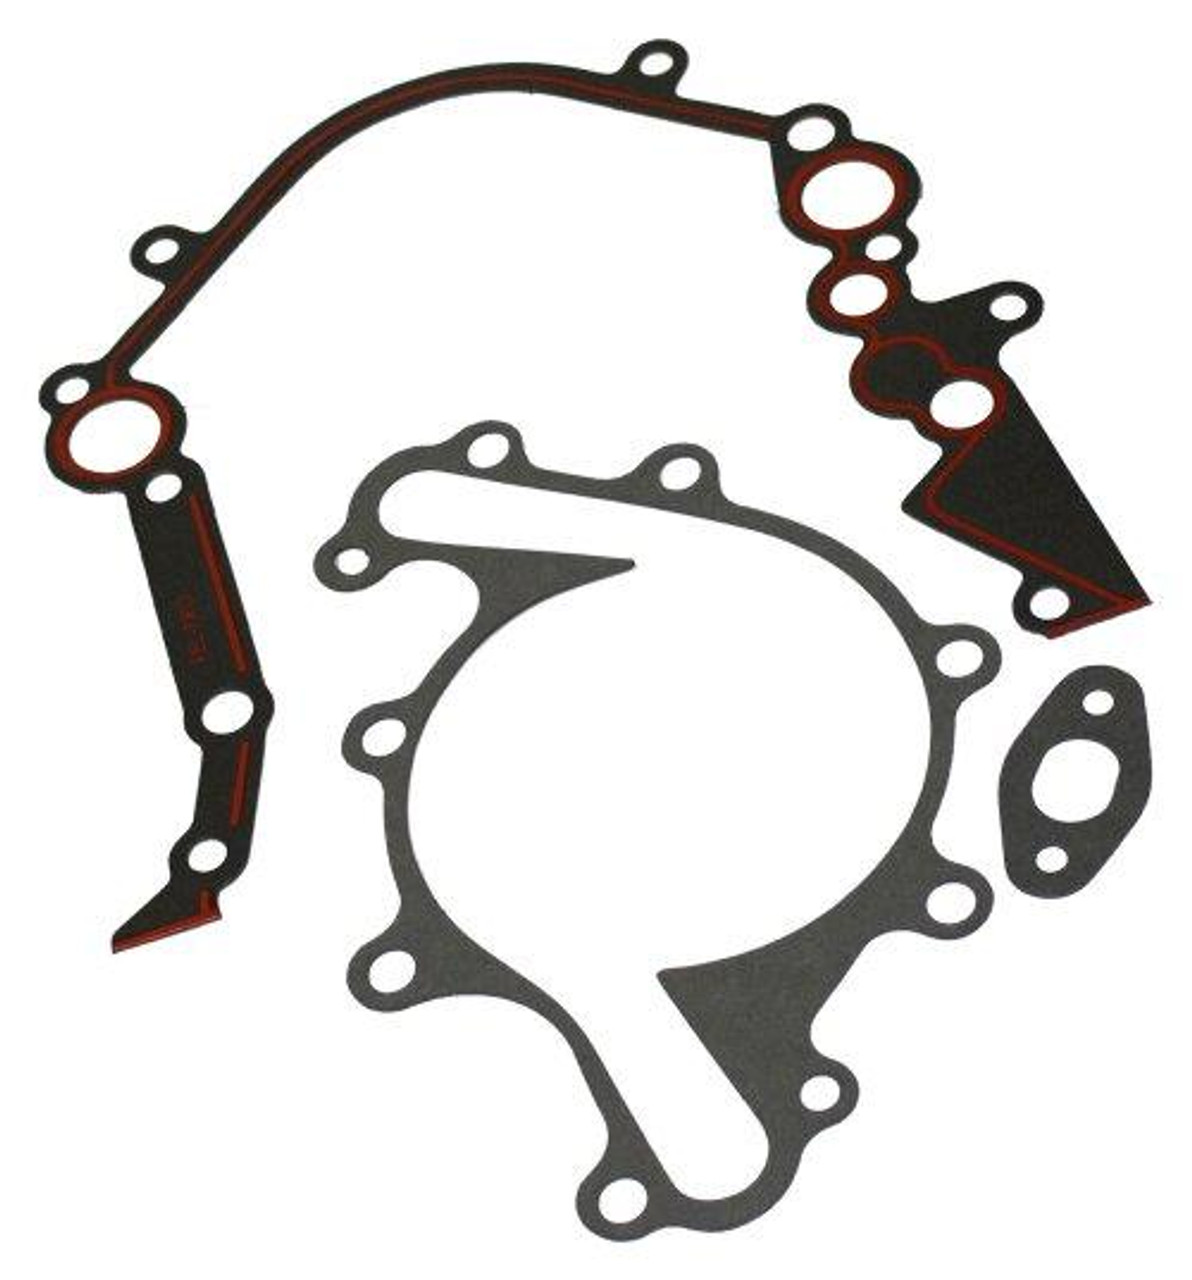 Lower Gasket Set - 1990 Lincoln Continental 3.8L Engine Parts # LGS4116ZE12